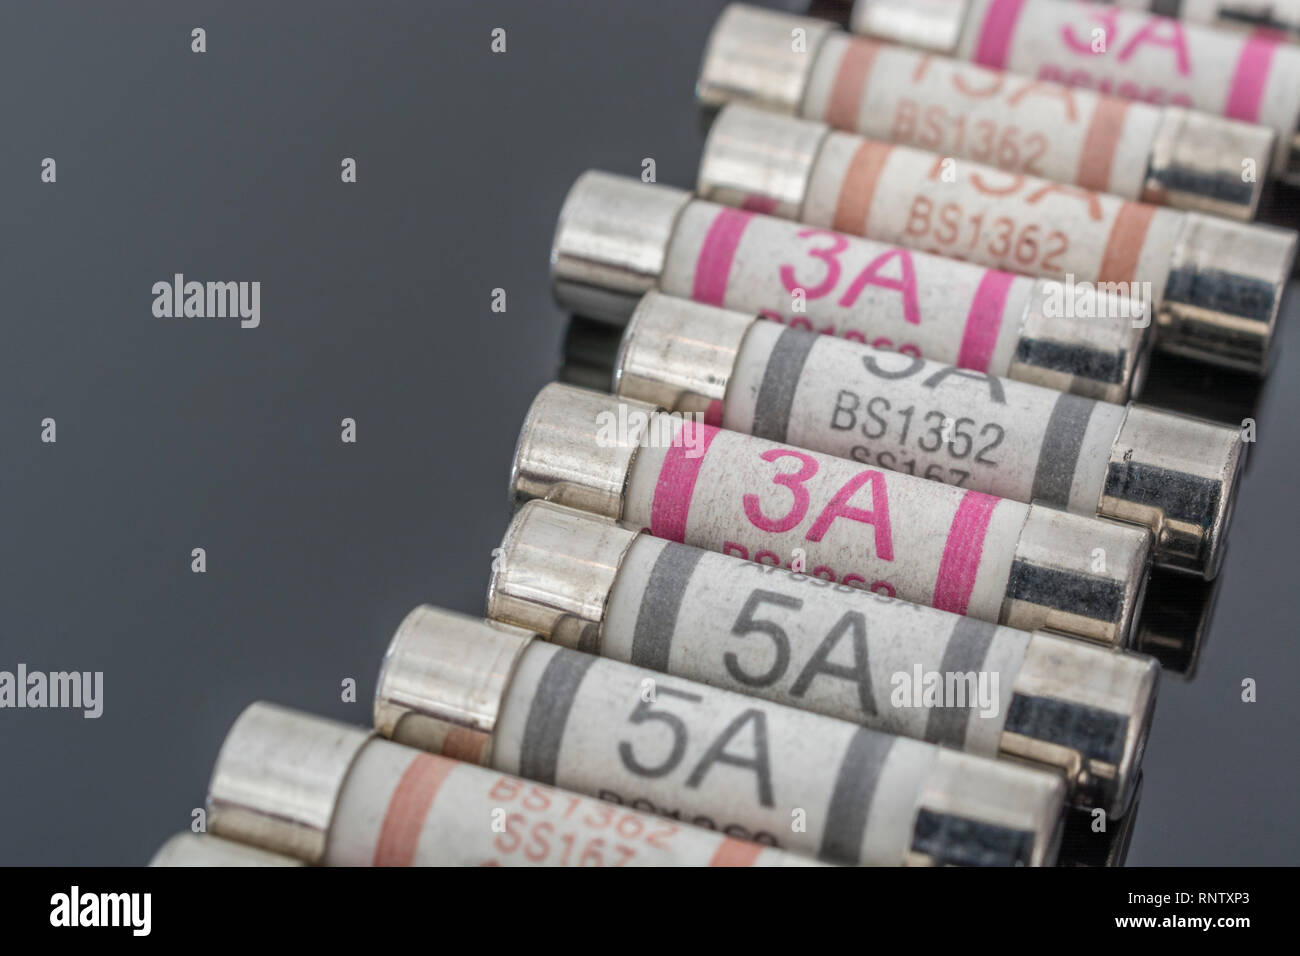 Domestic appliance 3A, 5A & 13A electrical fuses (Ceramic Cartridge type) on reflective black background. Metaphor electrical safety. 25mm L x 6.3mm D Stock Photo